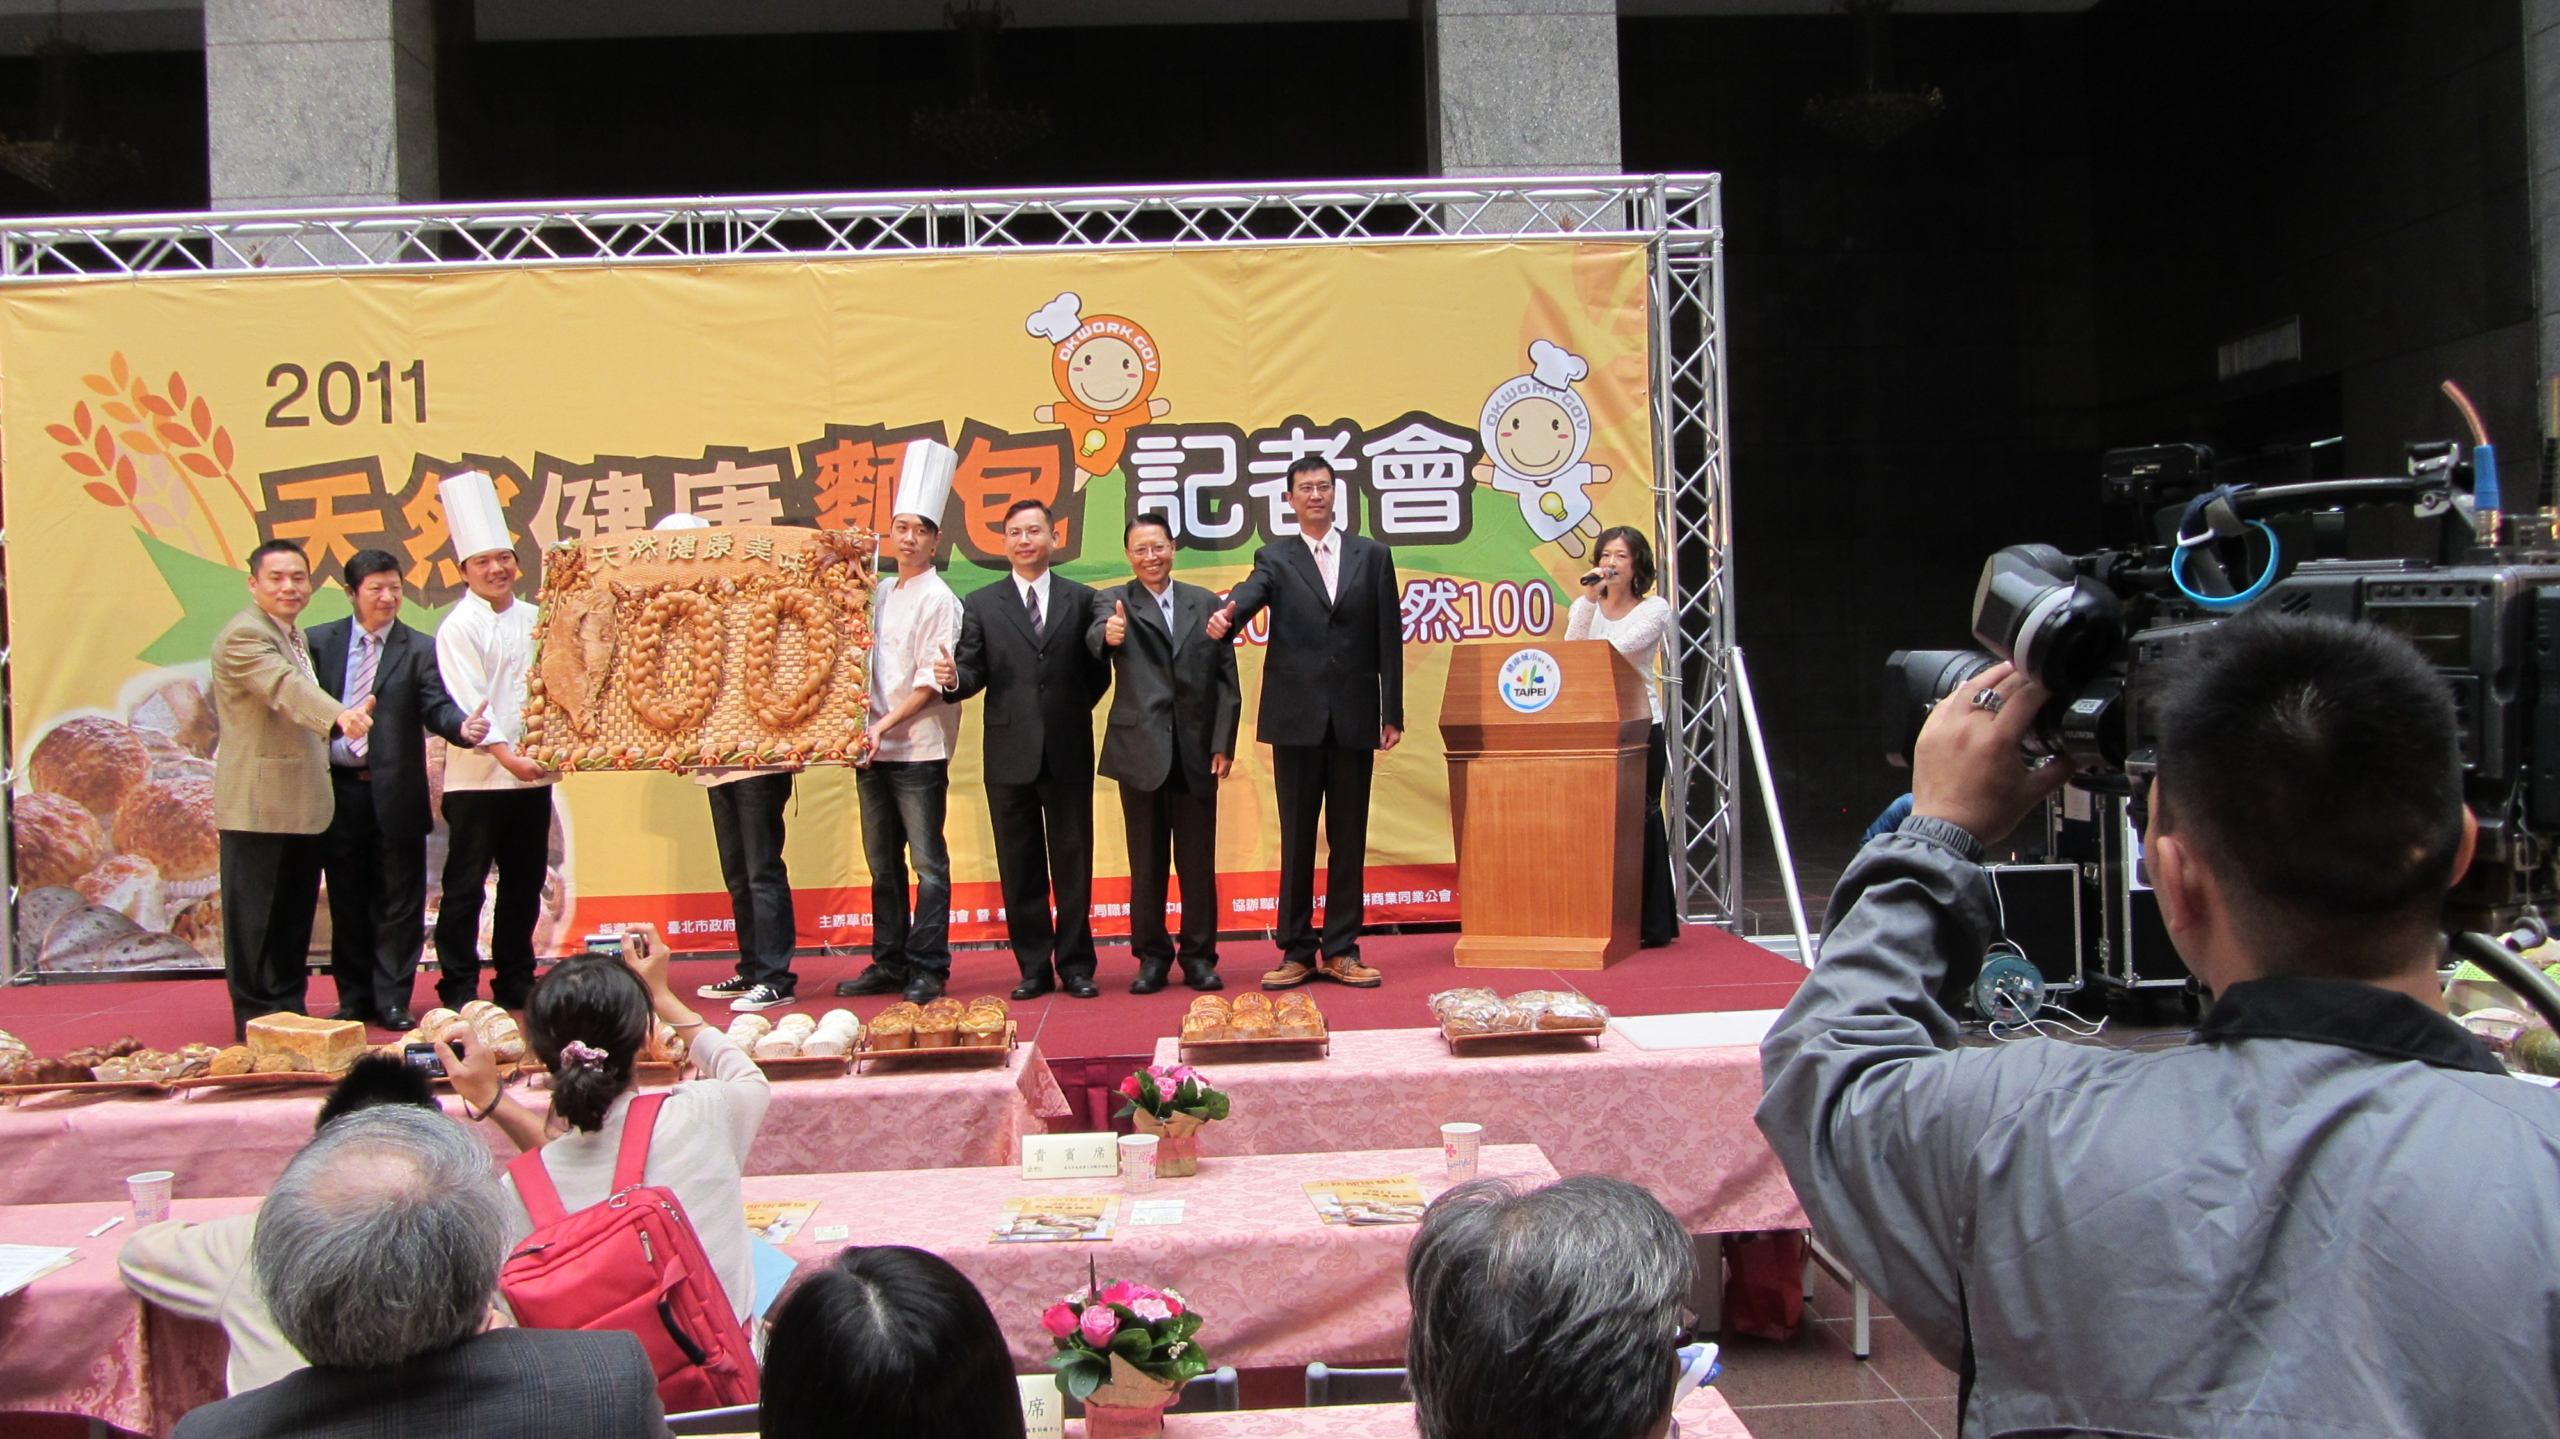 Ron Lu at a 2011 media event celebrating the development of healthy bread products for the Taiwanese people.